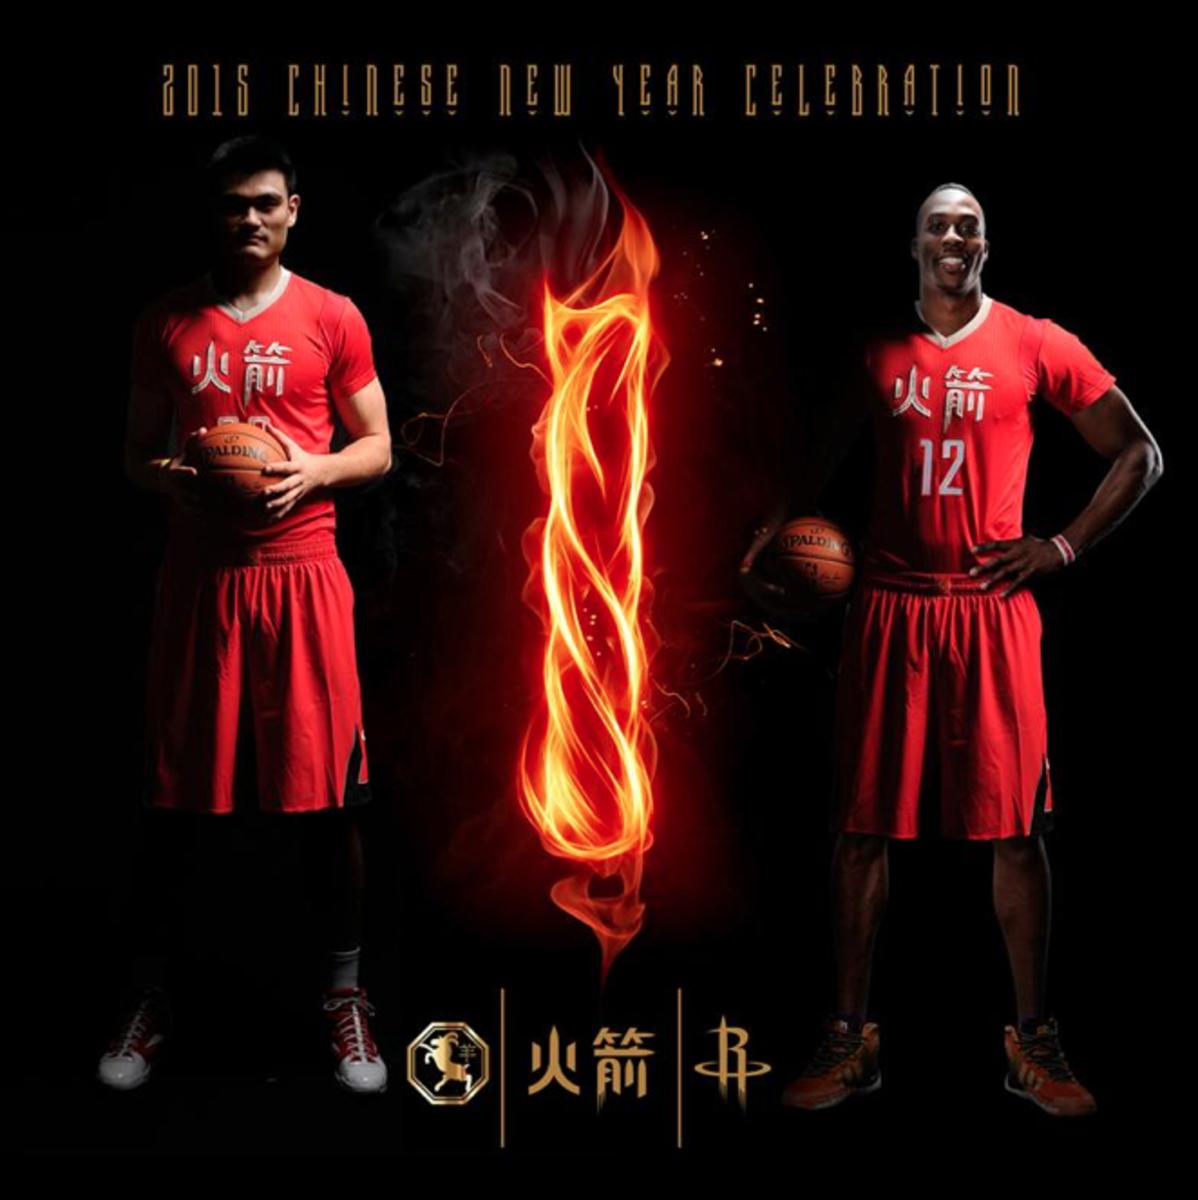 Golden State Warriors celebrate Chinese community with new uniforms